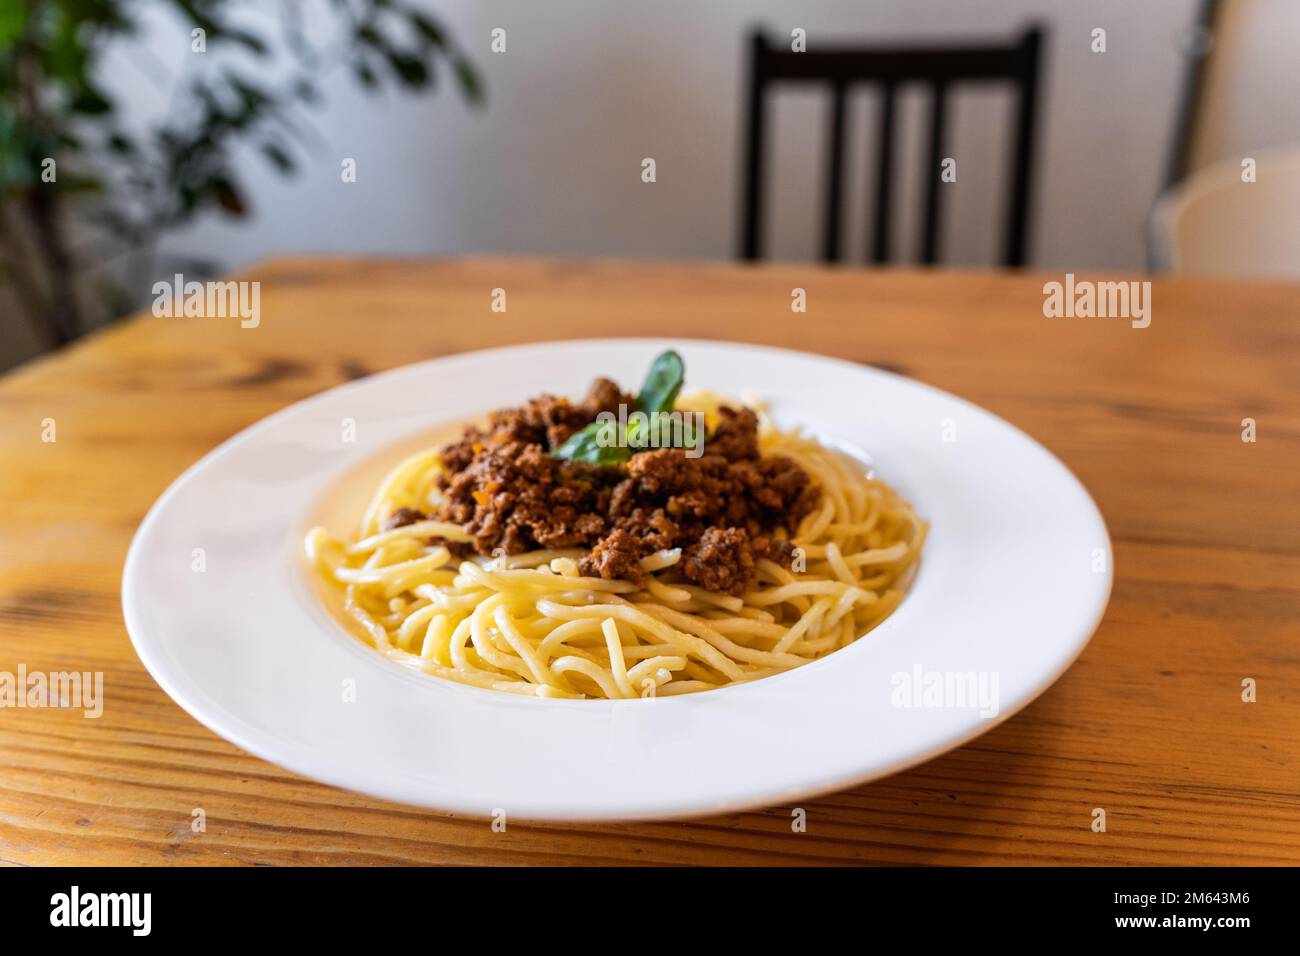 Plate with traditional Italian pasta spaghetti bolognese on a wooden table in the restaurant Stock Photo